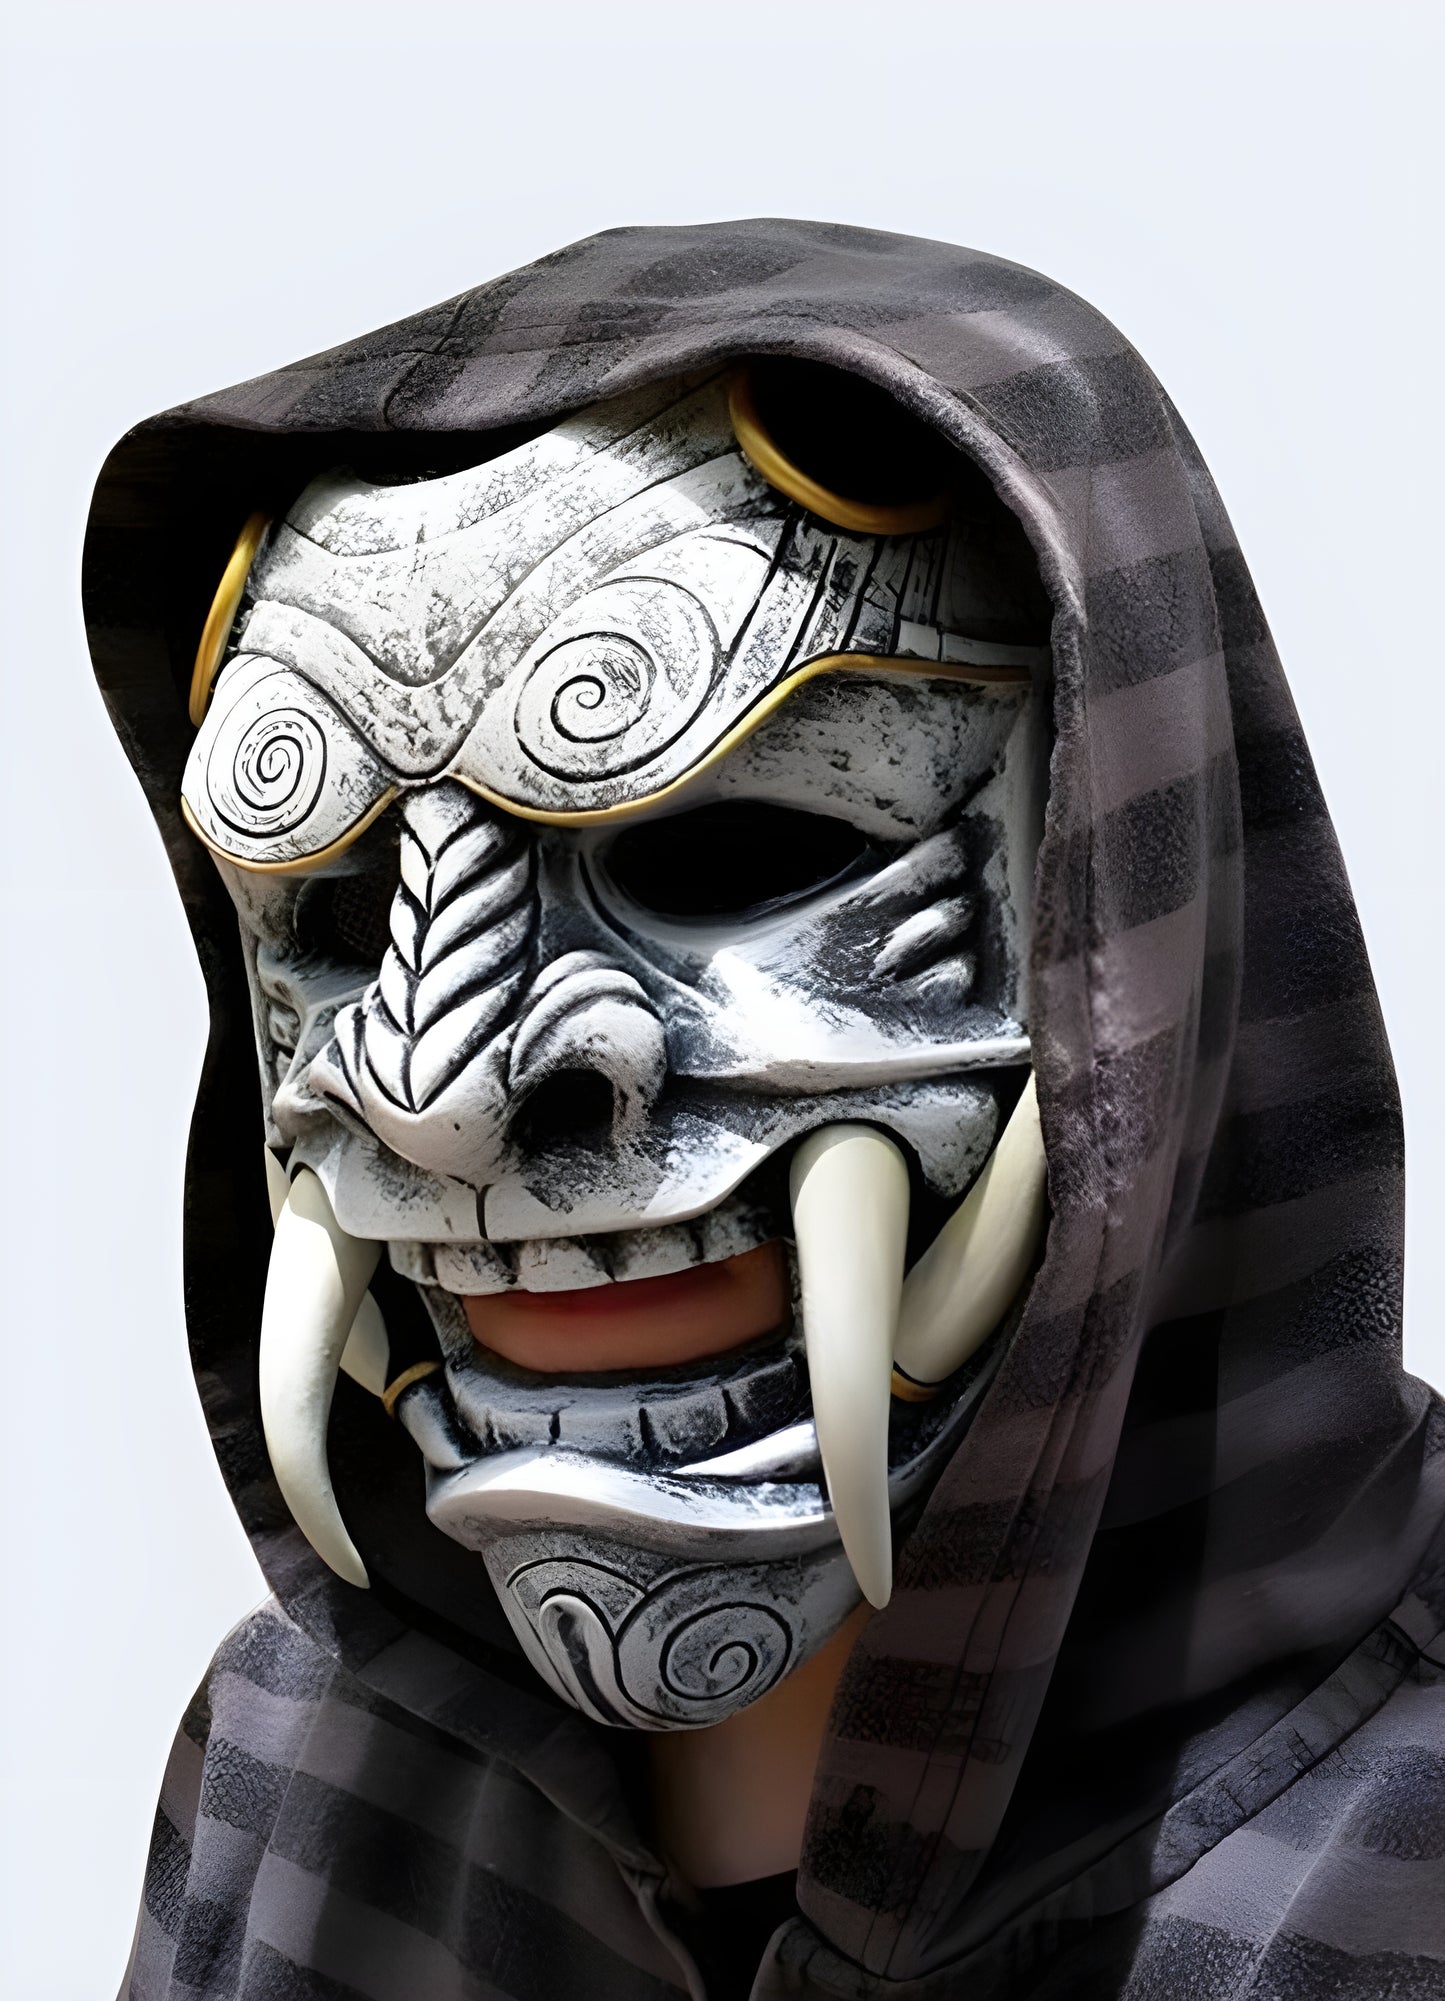 Frightening Japanese demon mask intricate hand-painted details.